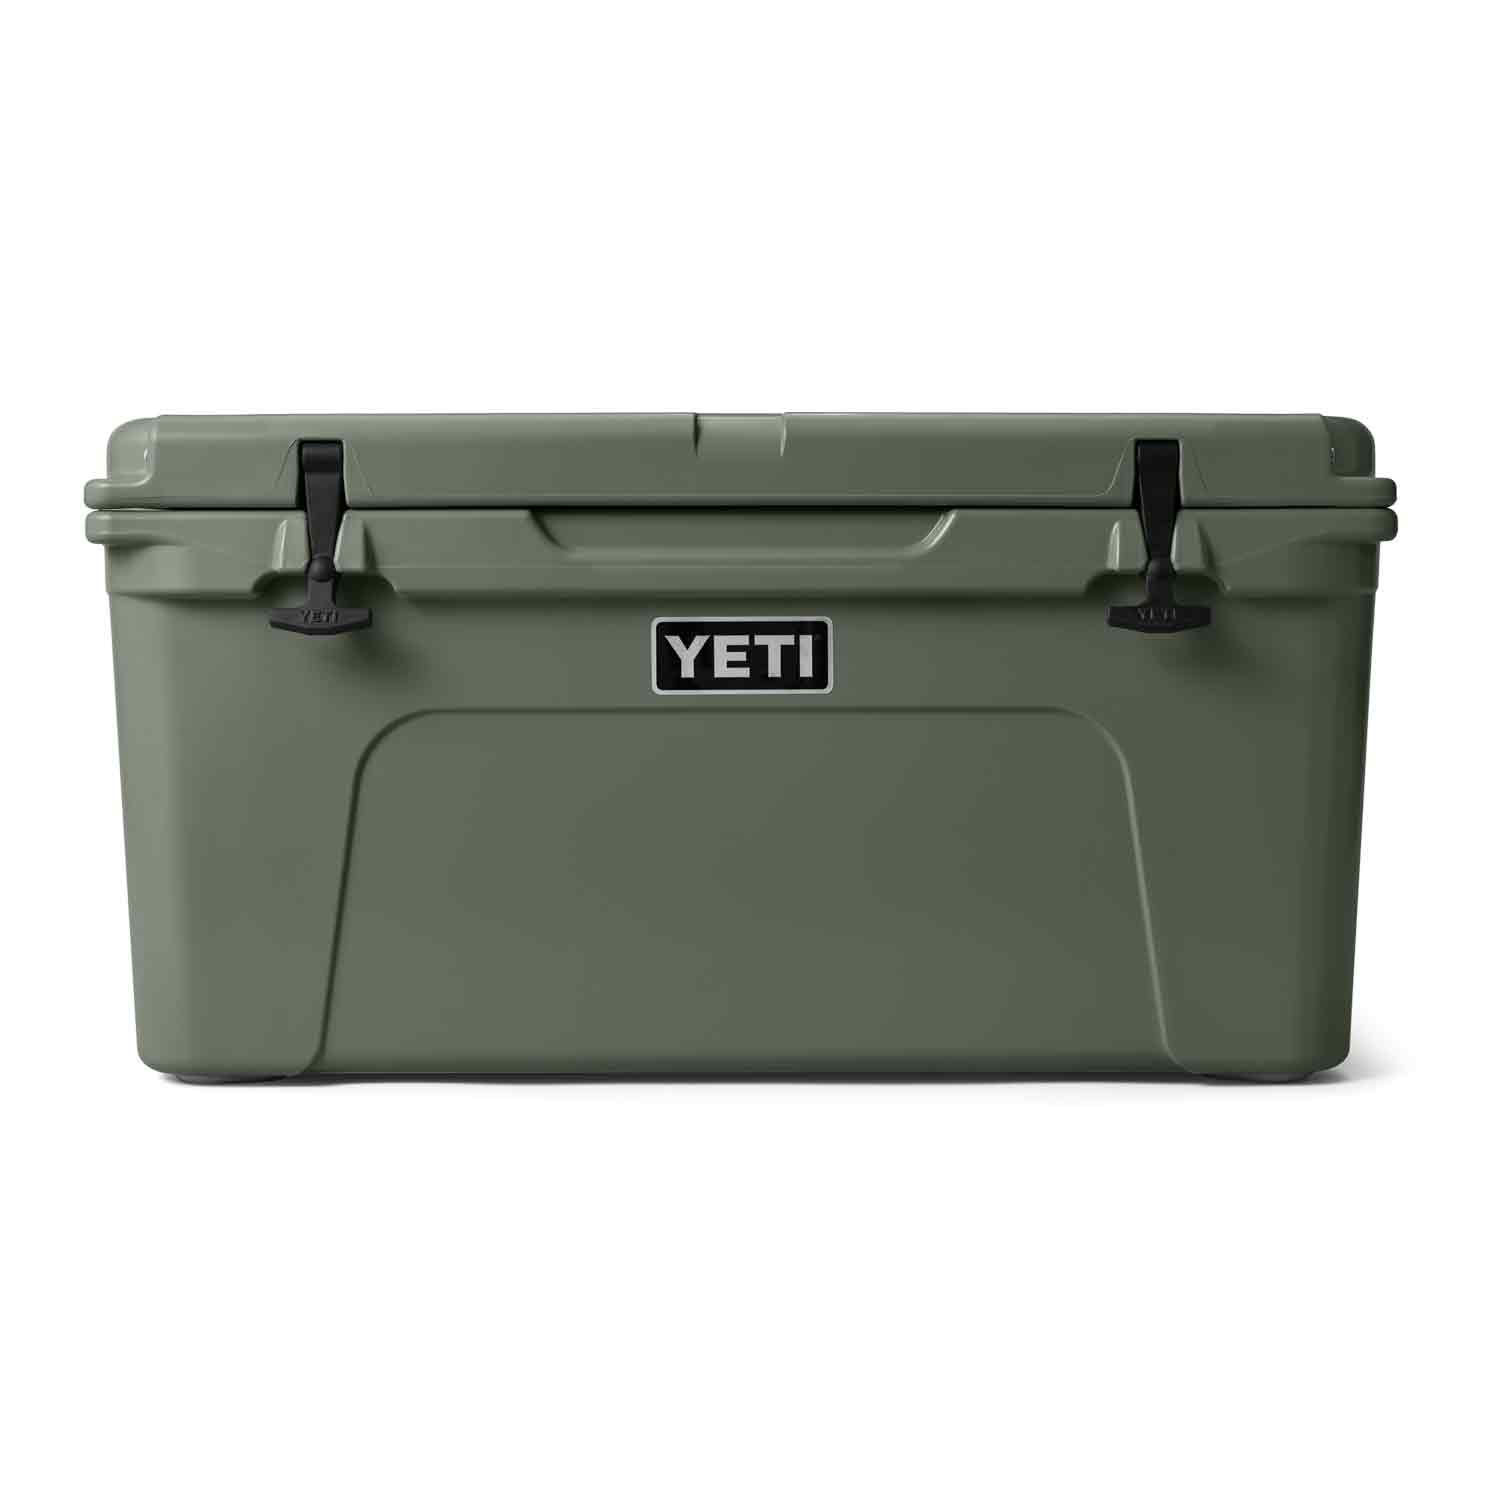 Limited Edition Yeti Cooler Package (Camp Green)